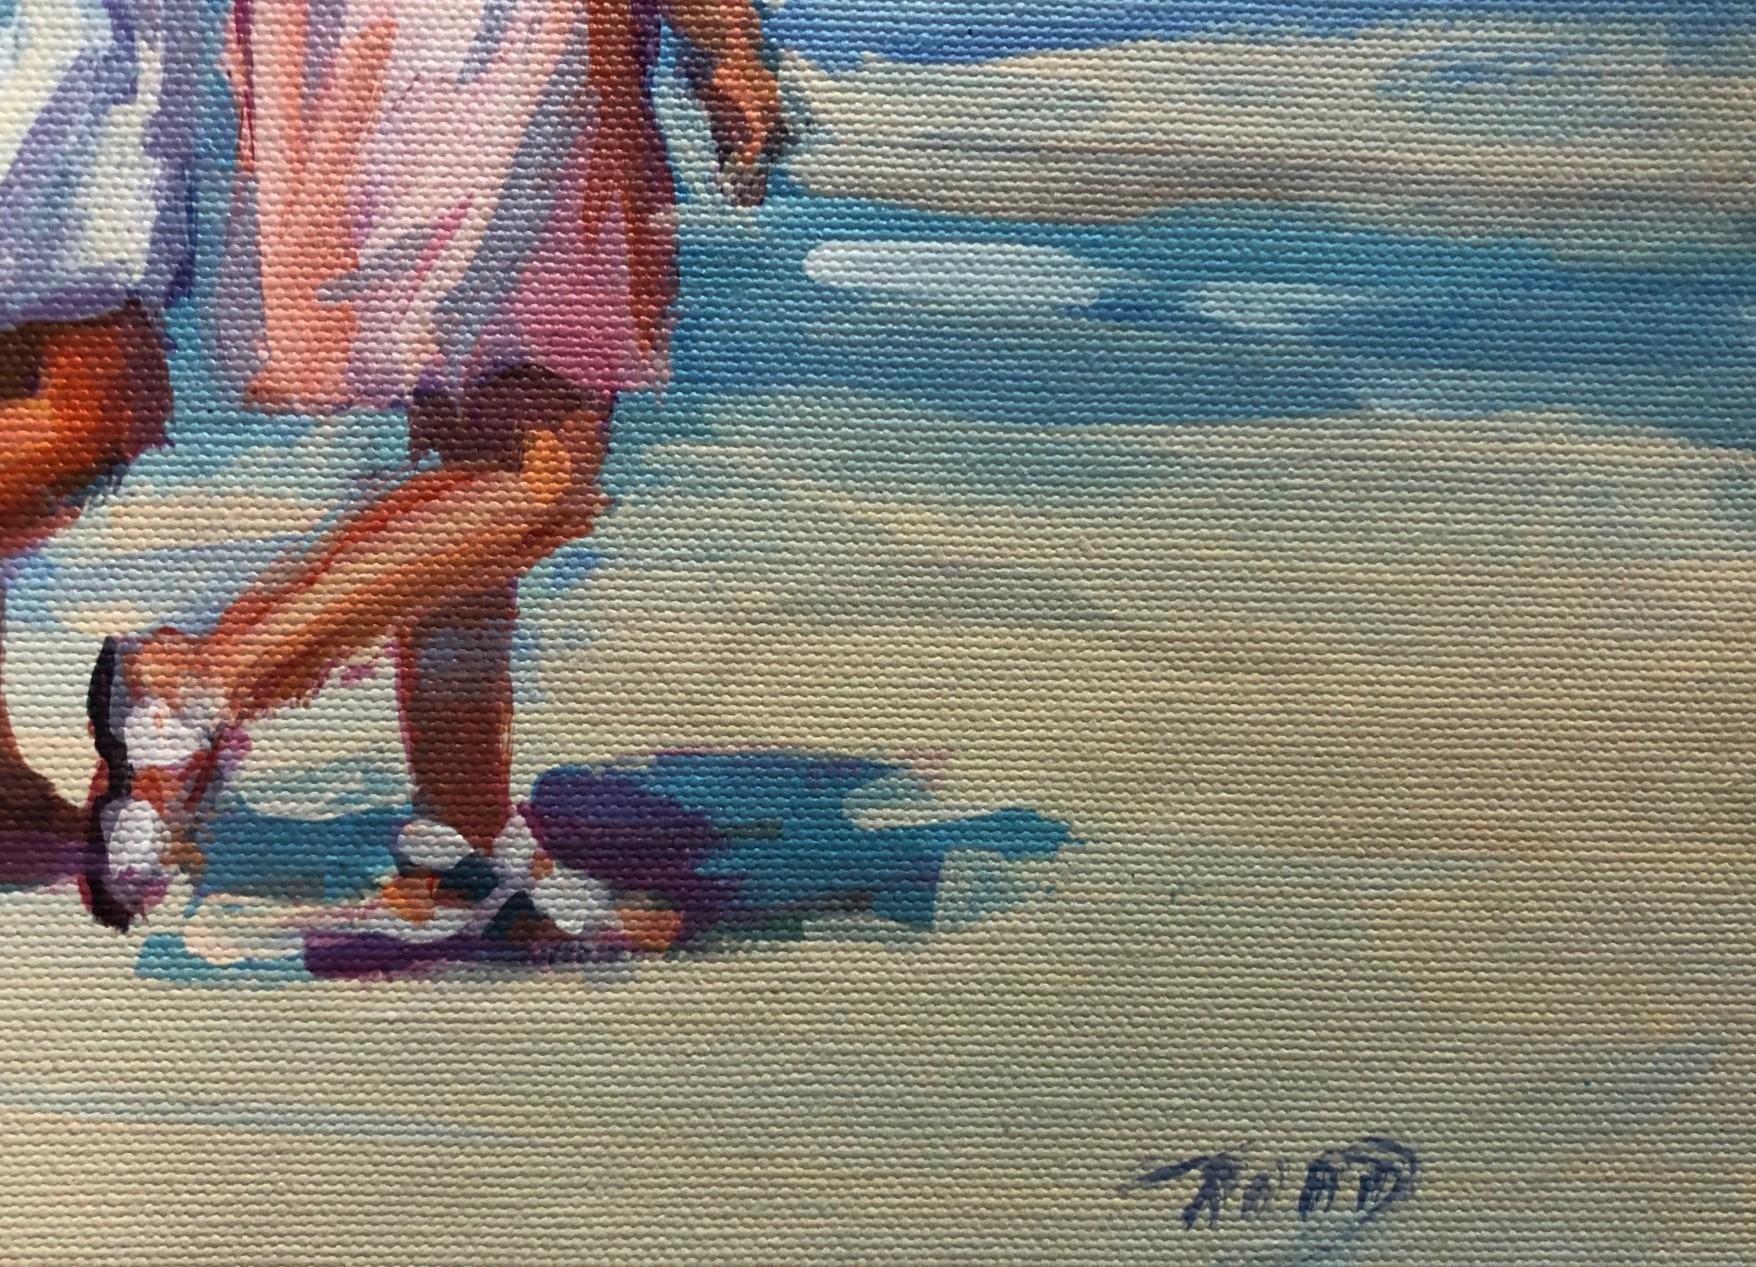 Beach Stroll-Limited Edition Giclée on Unstretched Canvas - Print by Lucelle Raad